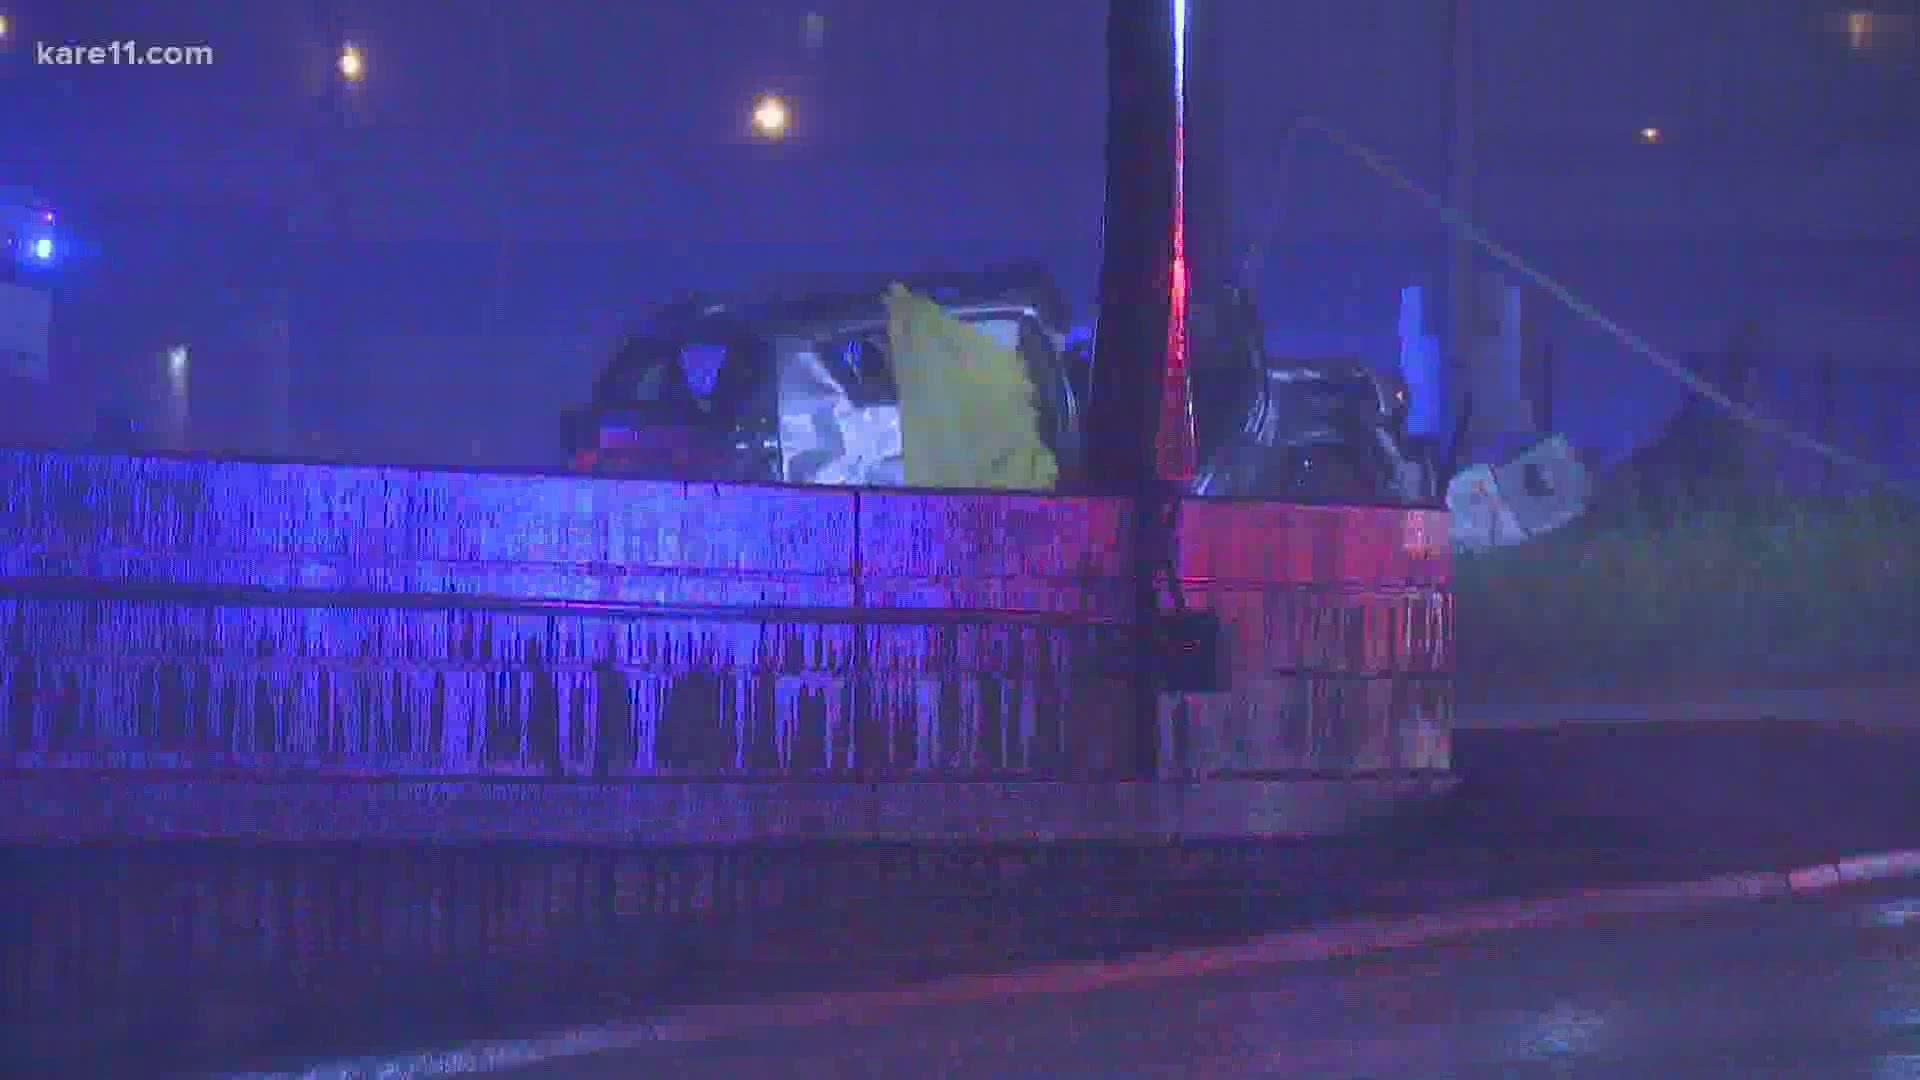 A man is dead after losing control of his SUV during a major downpour and crashing off I-94 in Minneapolis.